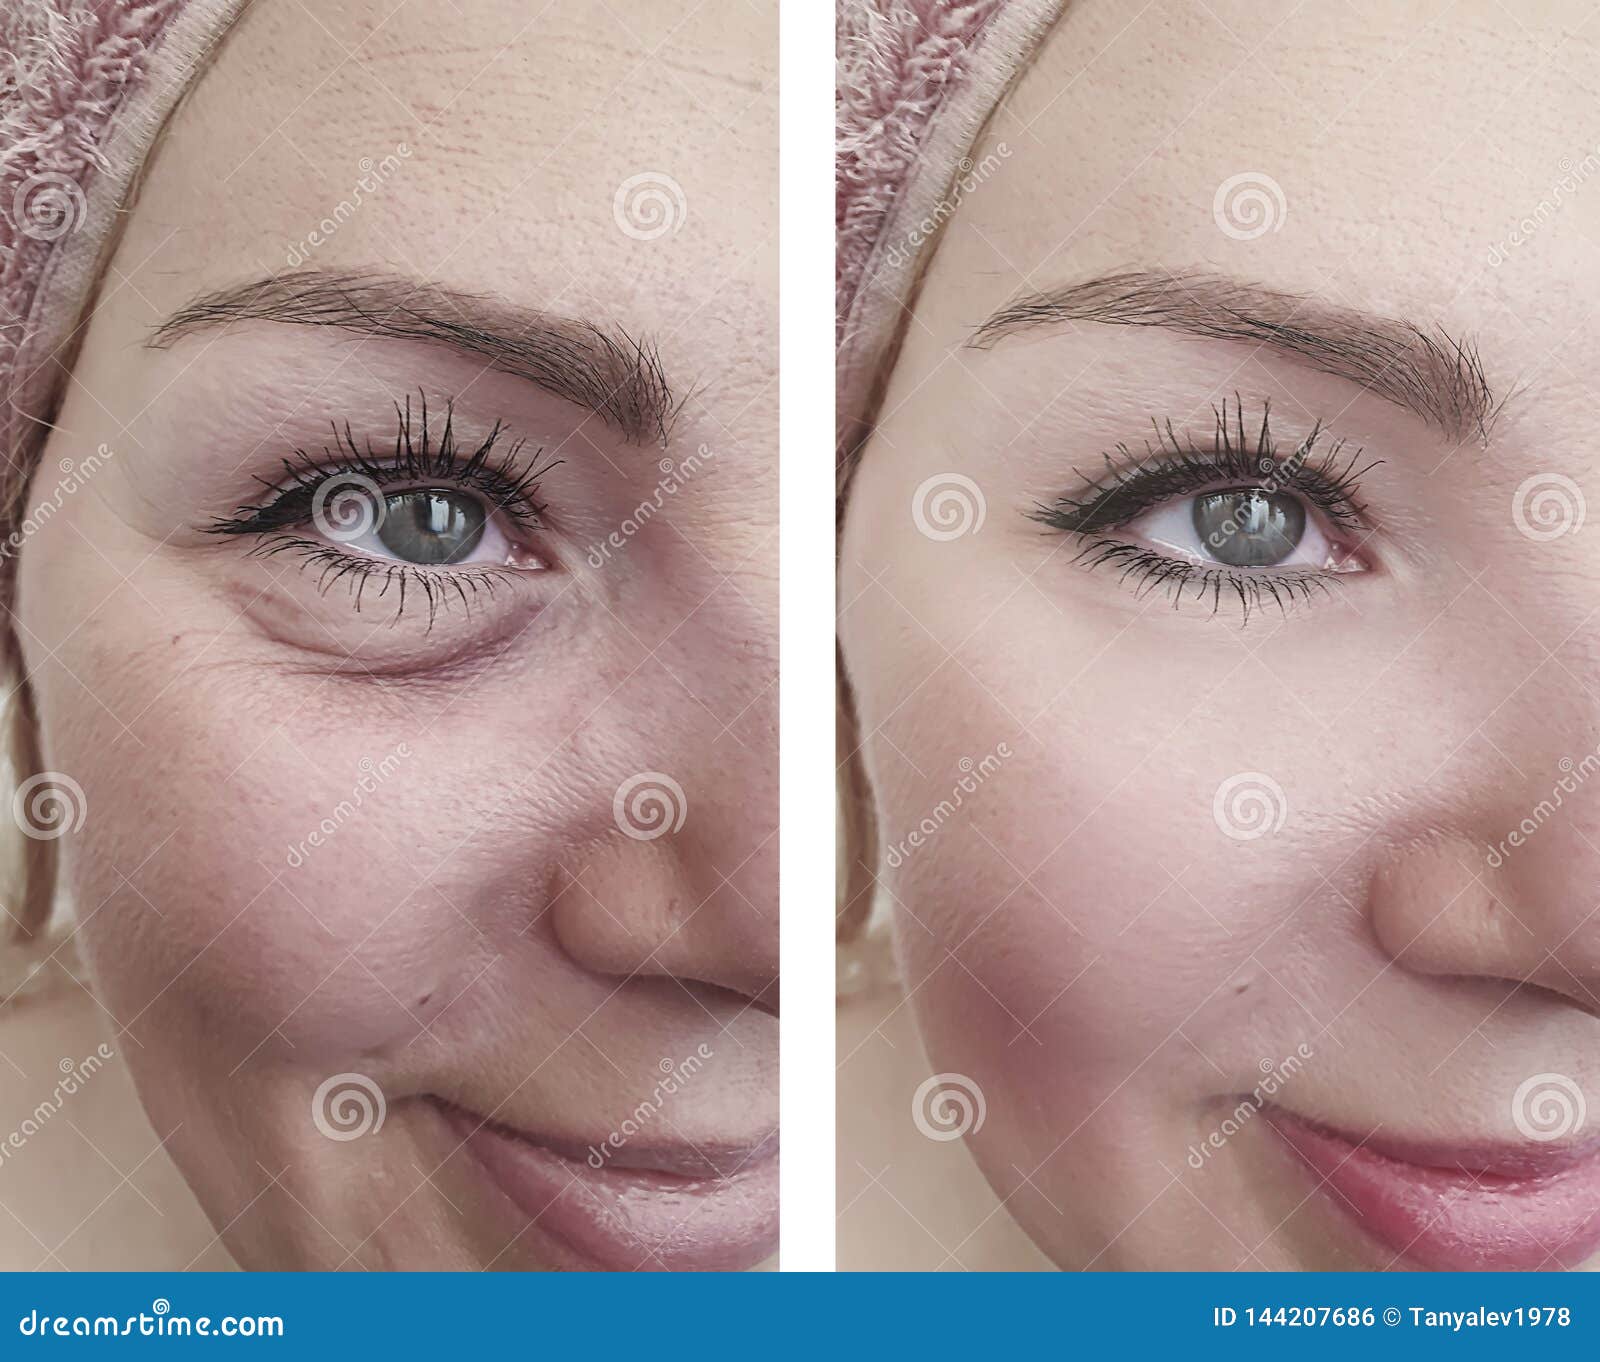 woman beauty wrinkles removal lift antiaging cosmetology before and after correction procedures